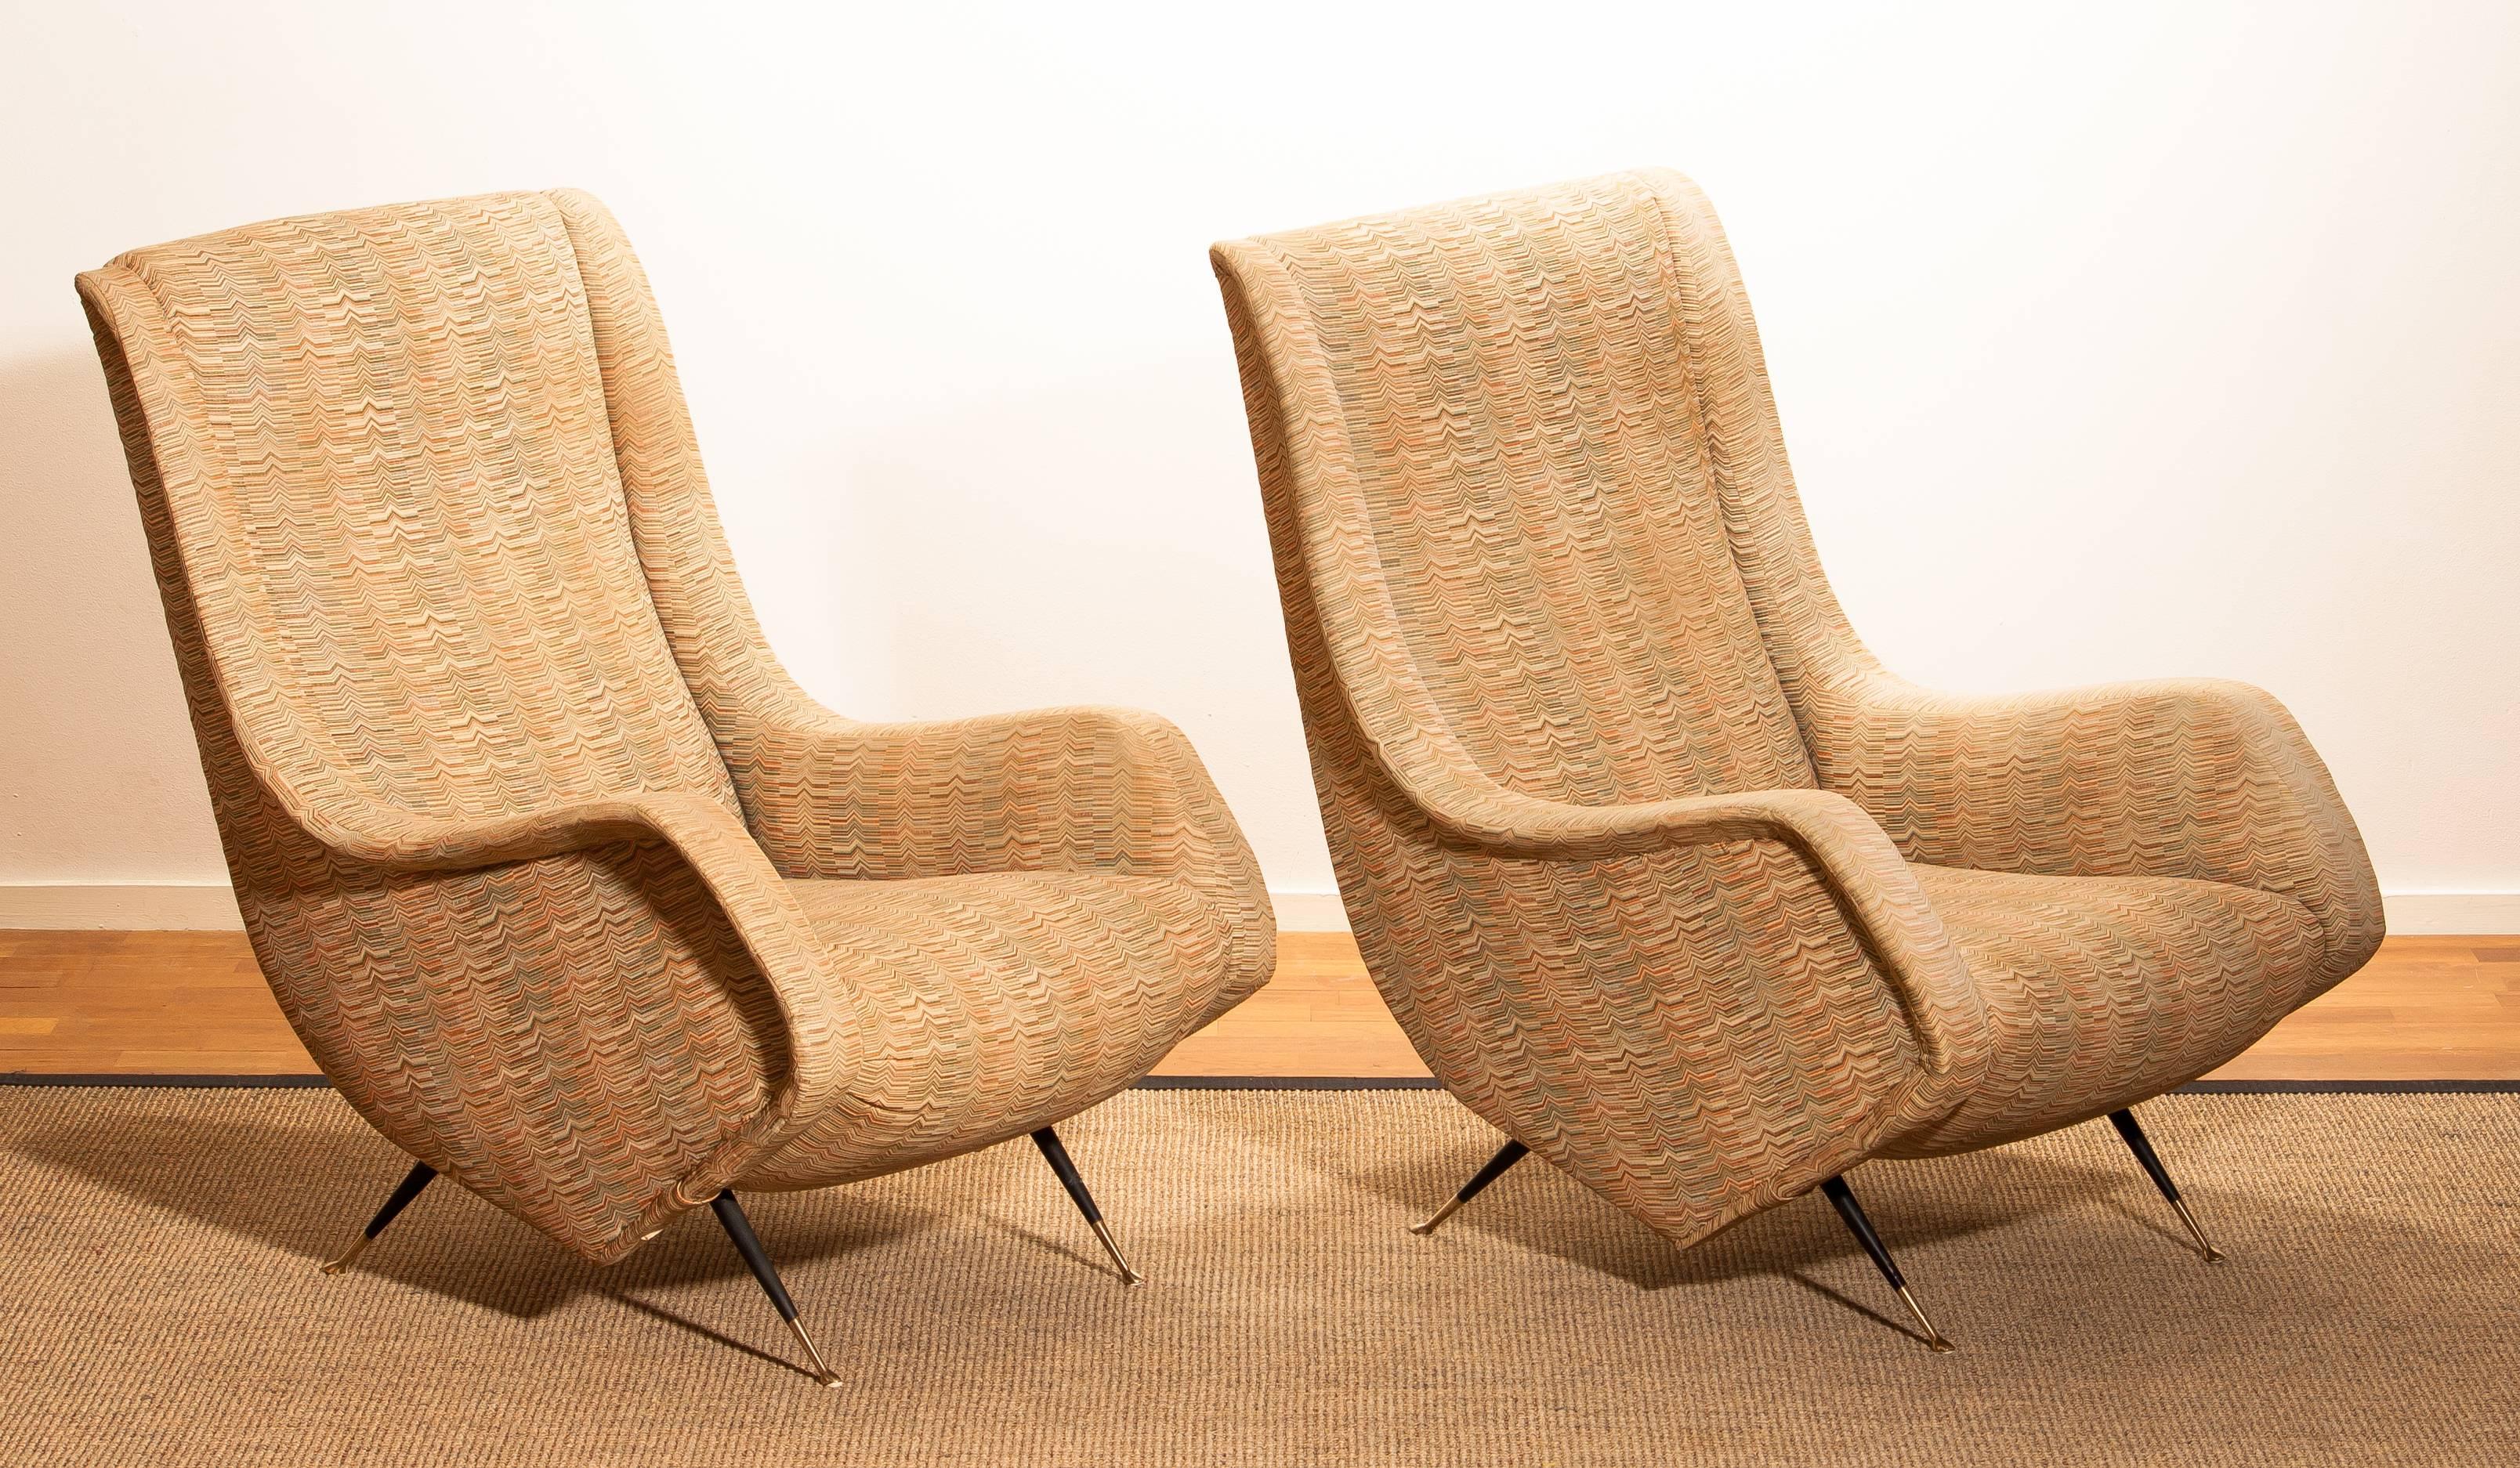 Set of Two Original Easy Chairs from the 1950s by Aldo Morbelli for Isa Bergamo 1